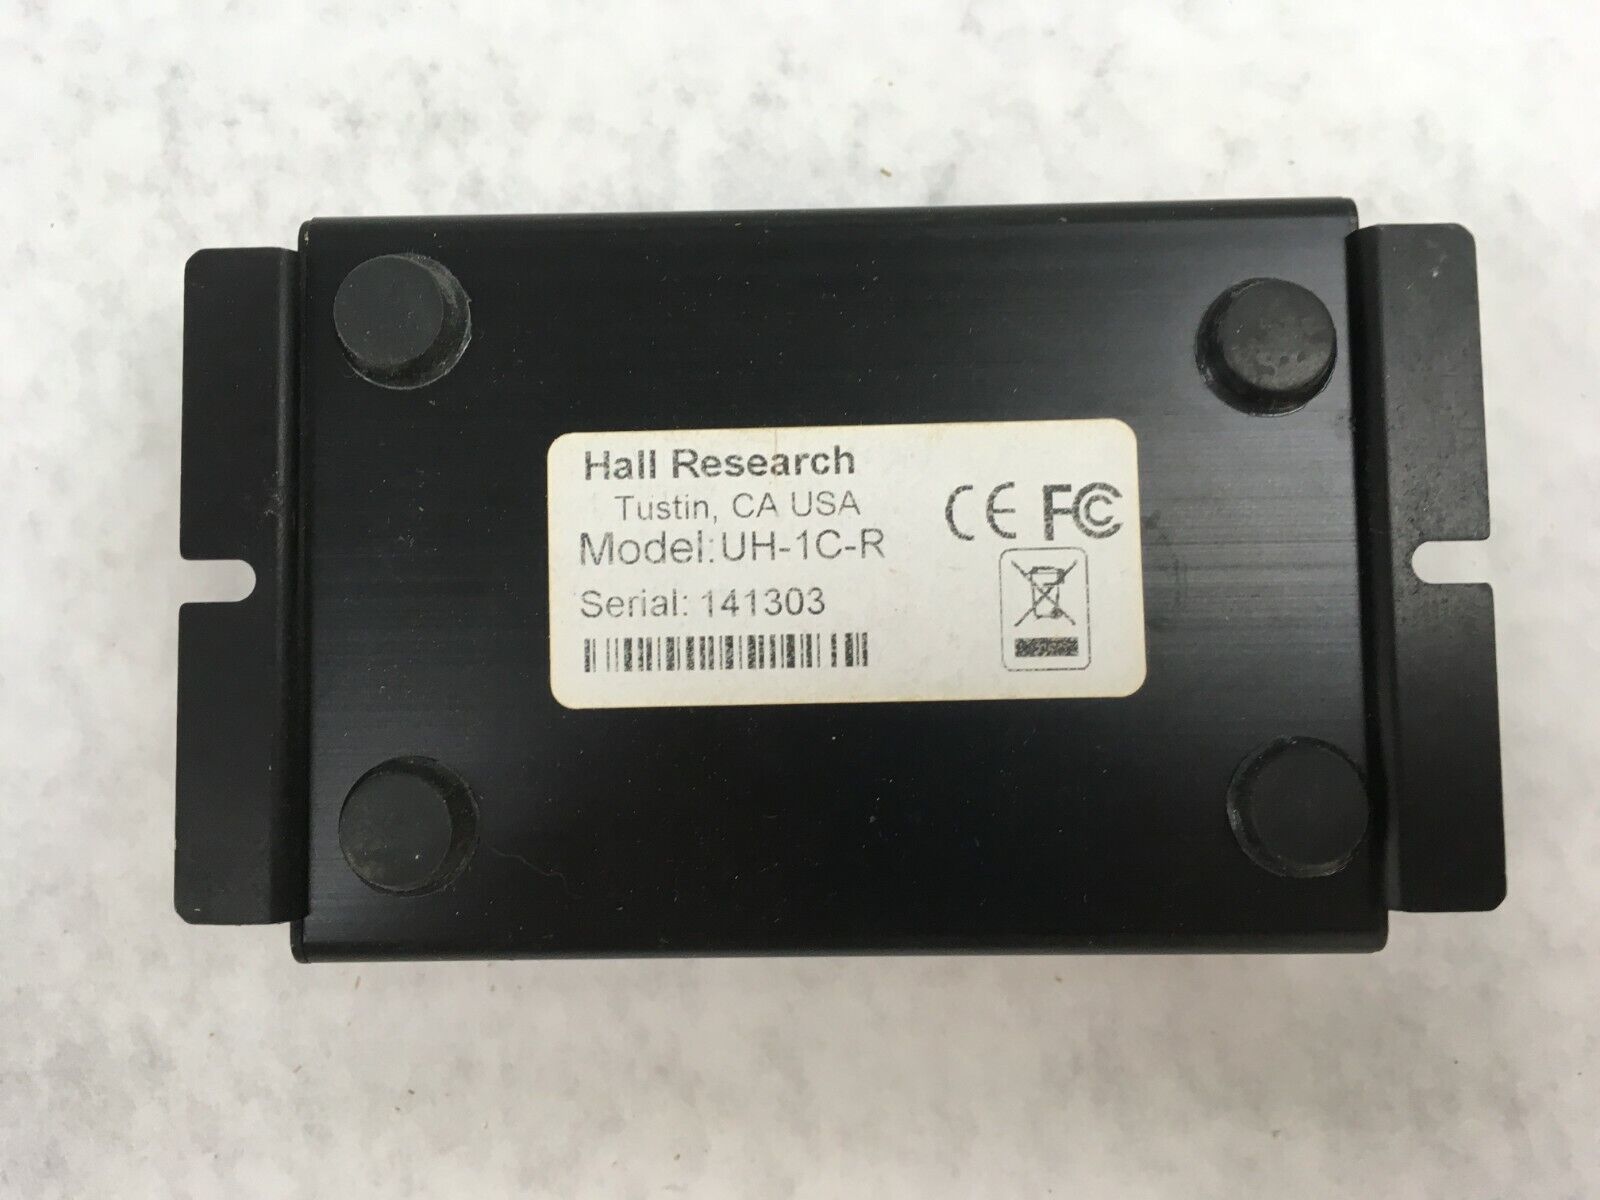 HR Hall Research HDMI Extender Receiver Model UH-1C-R